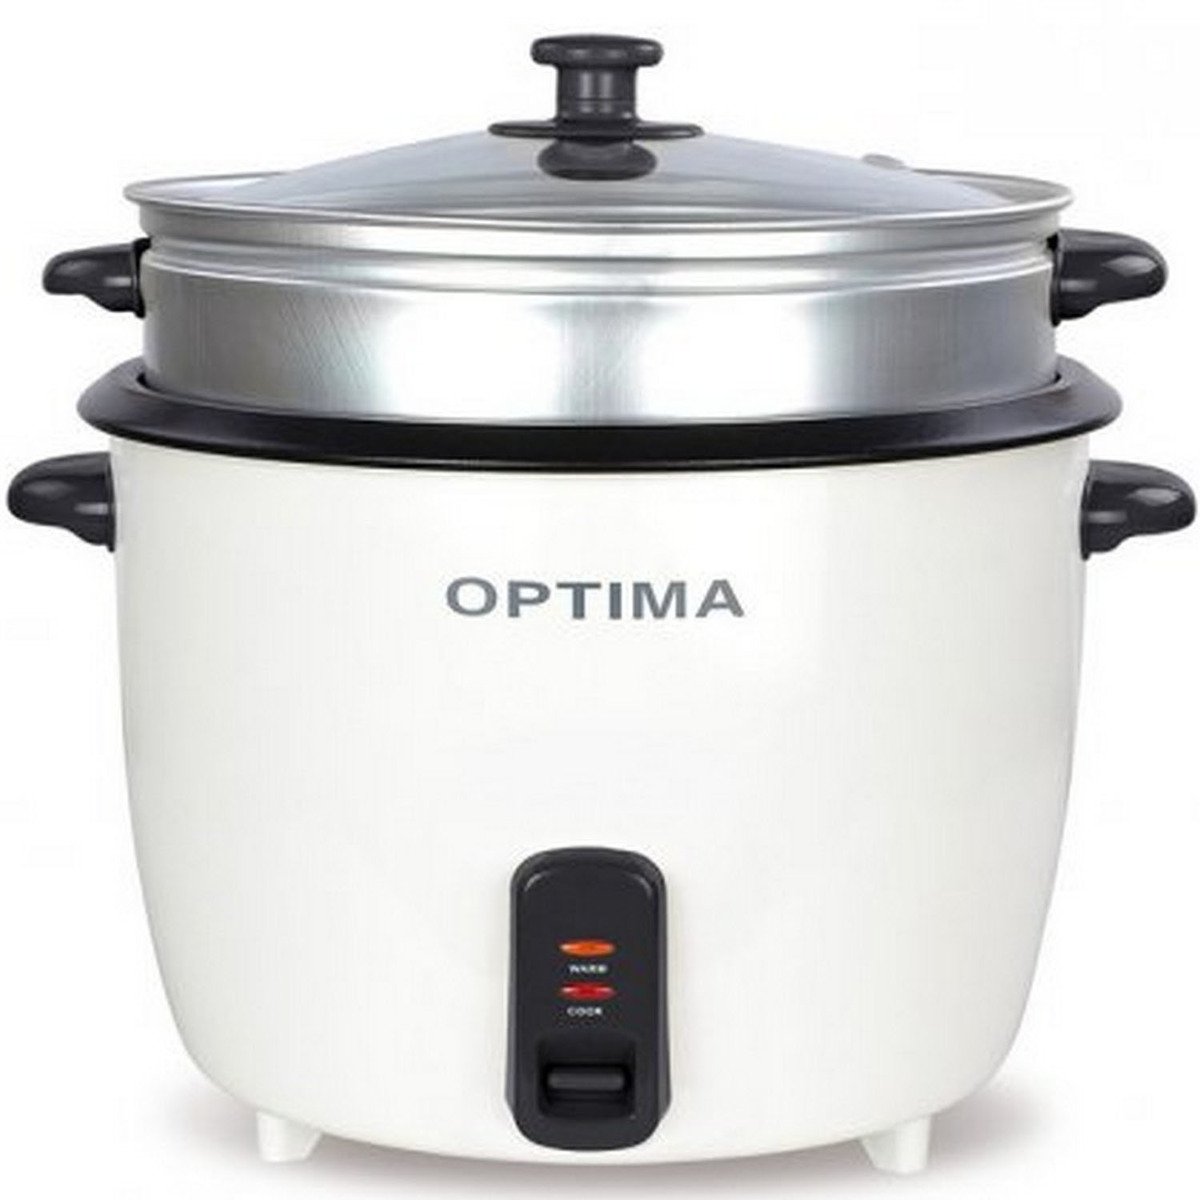 Optima Rice Cooker RC700 1.8Ltr